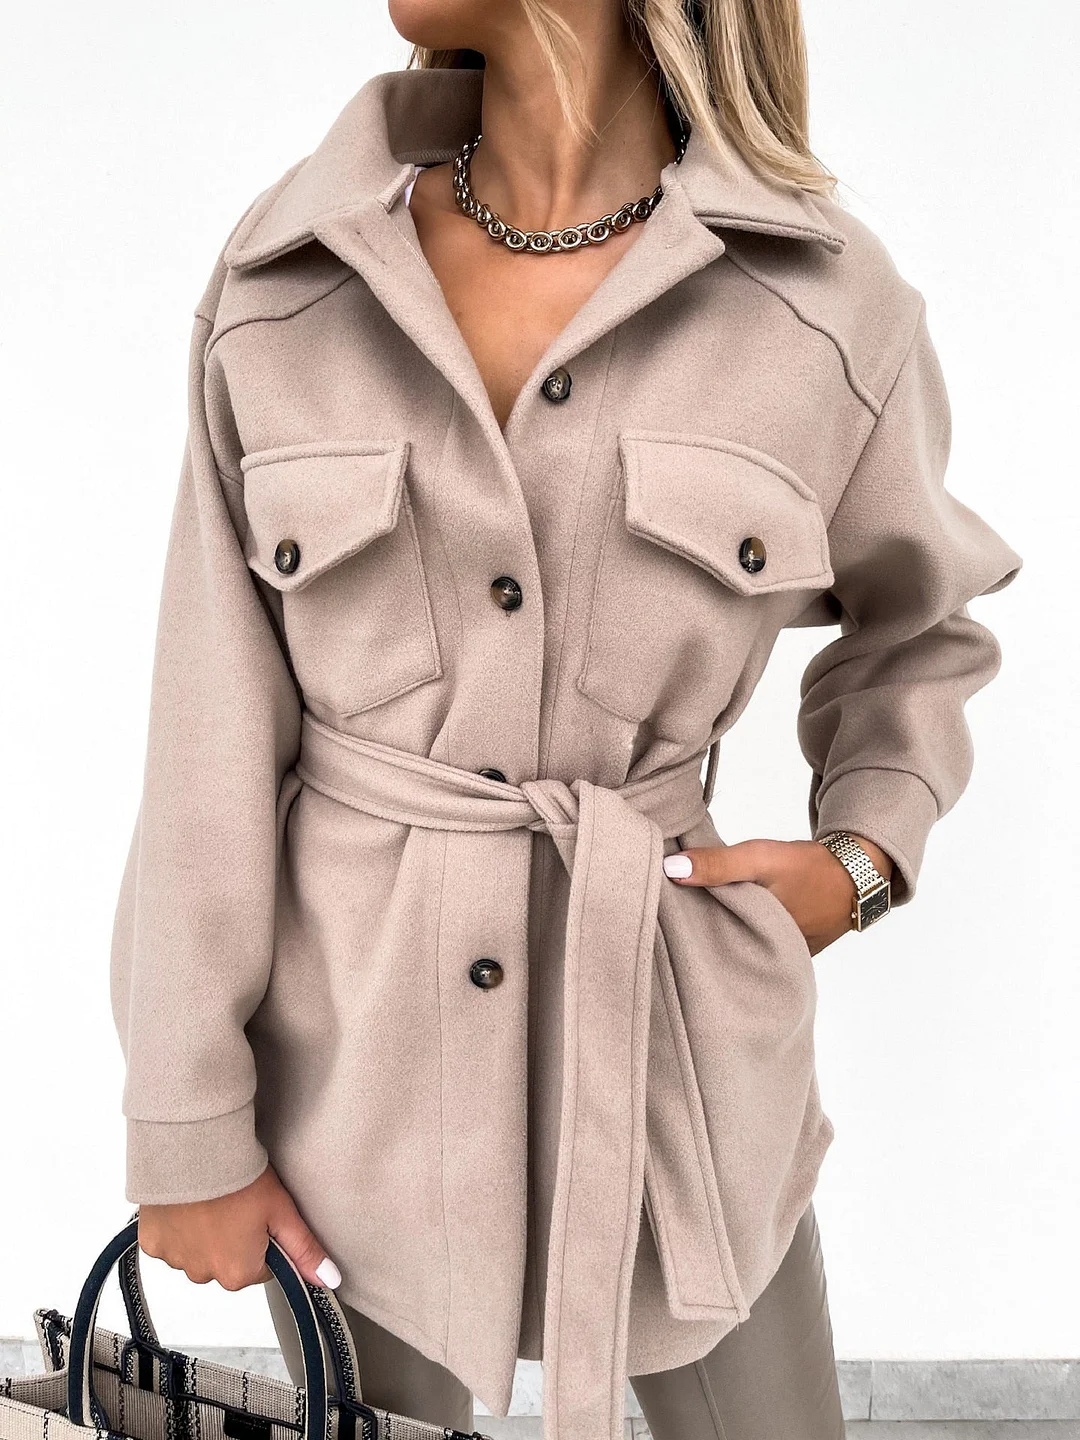 2021 fall/winter lapel single-breasted thick solid color shirt woolen loose coat women